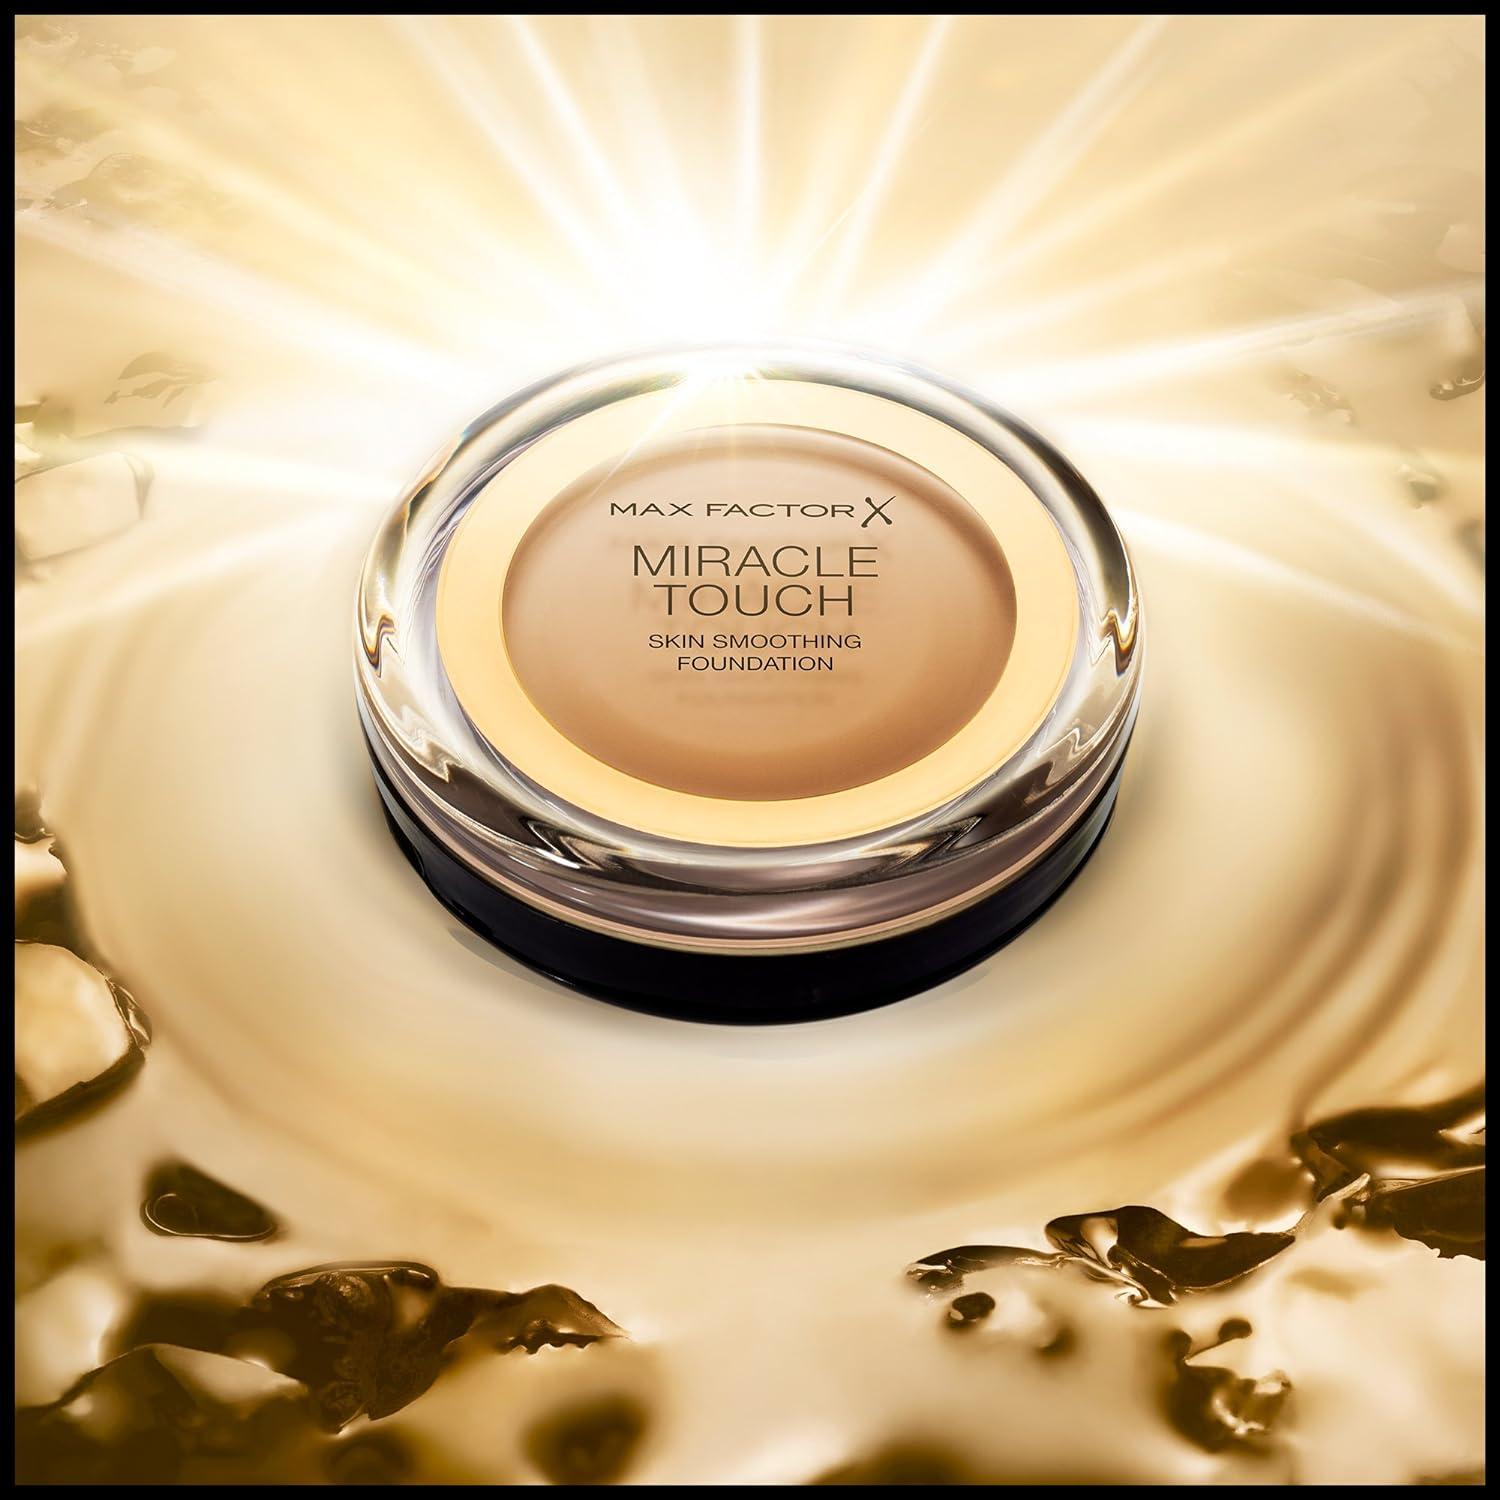 Liquid Illusion No. 11.5 Foundation Max 1per Touch Miracle Factor (1 x Caramel 85 g) Pack